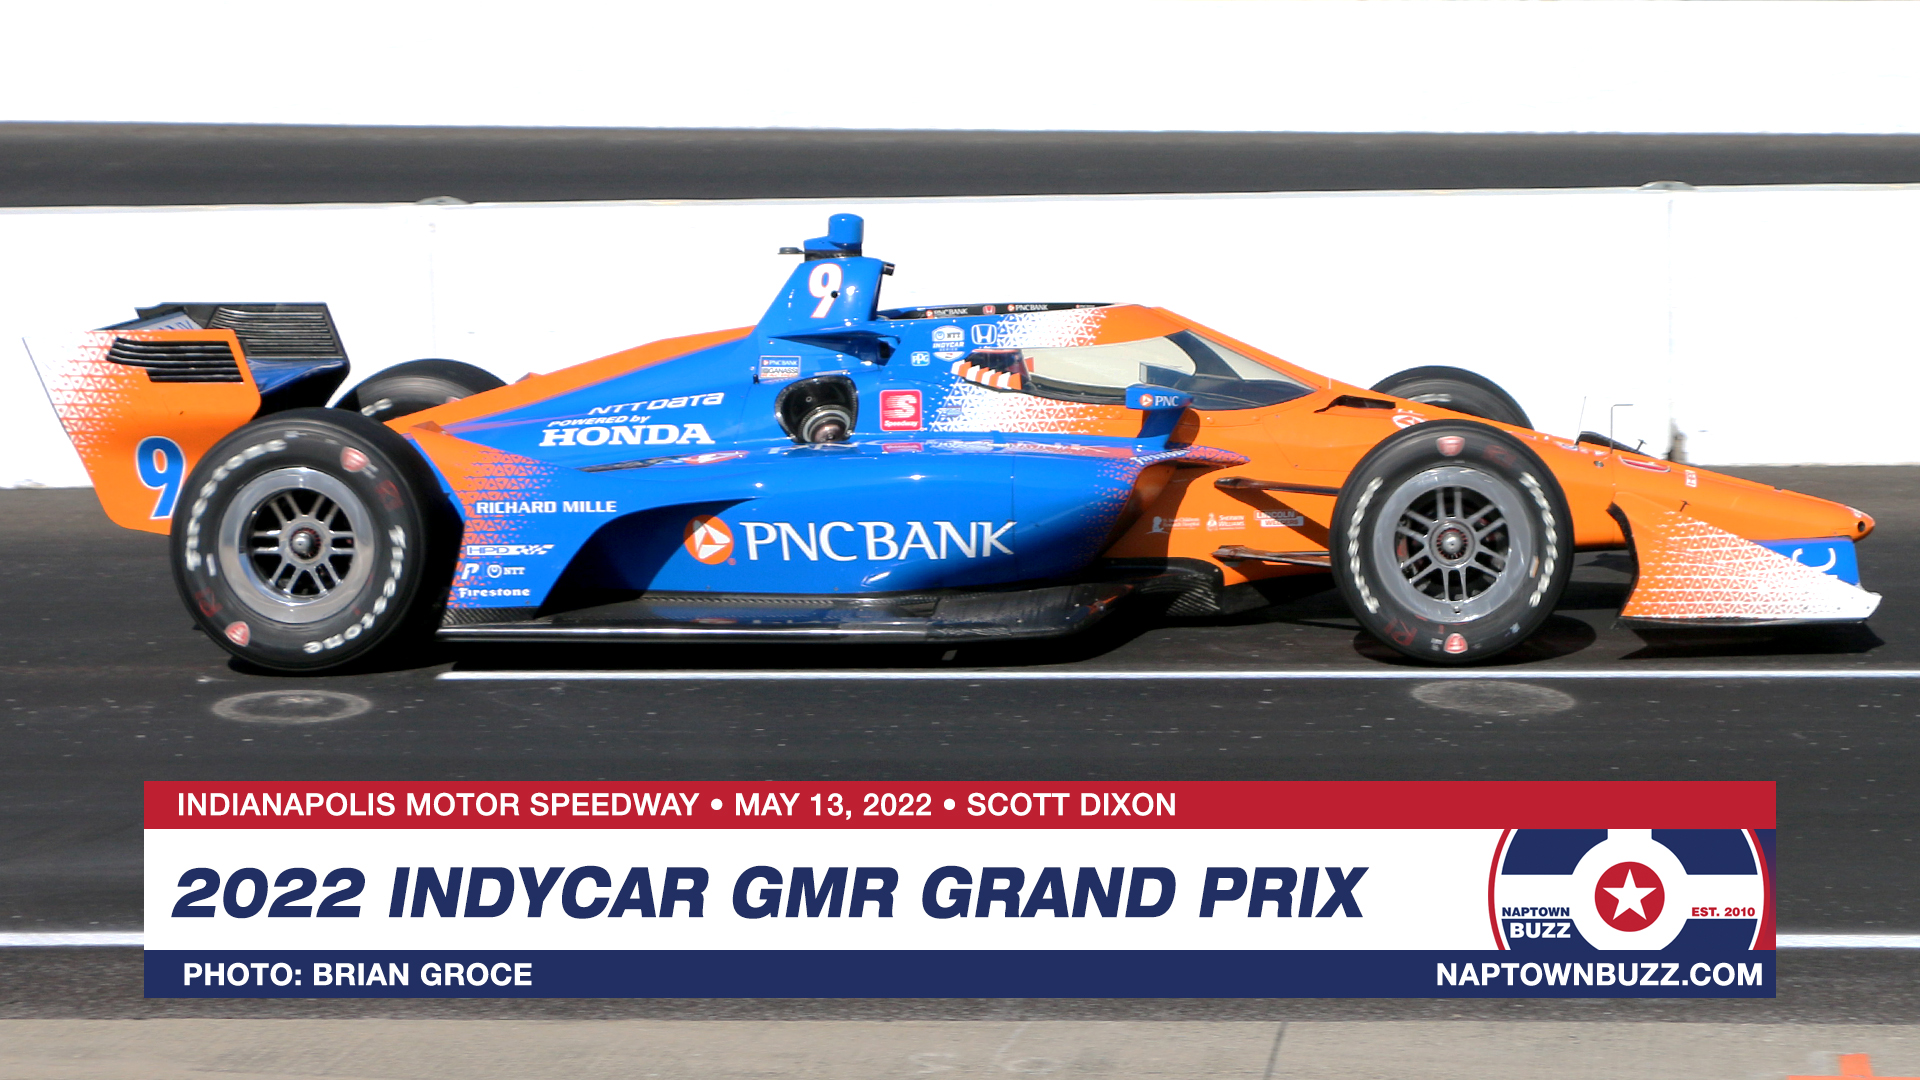 Scott Dixon on May 13, 2022, at Indianapolis Motor Speedway